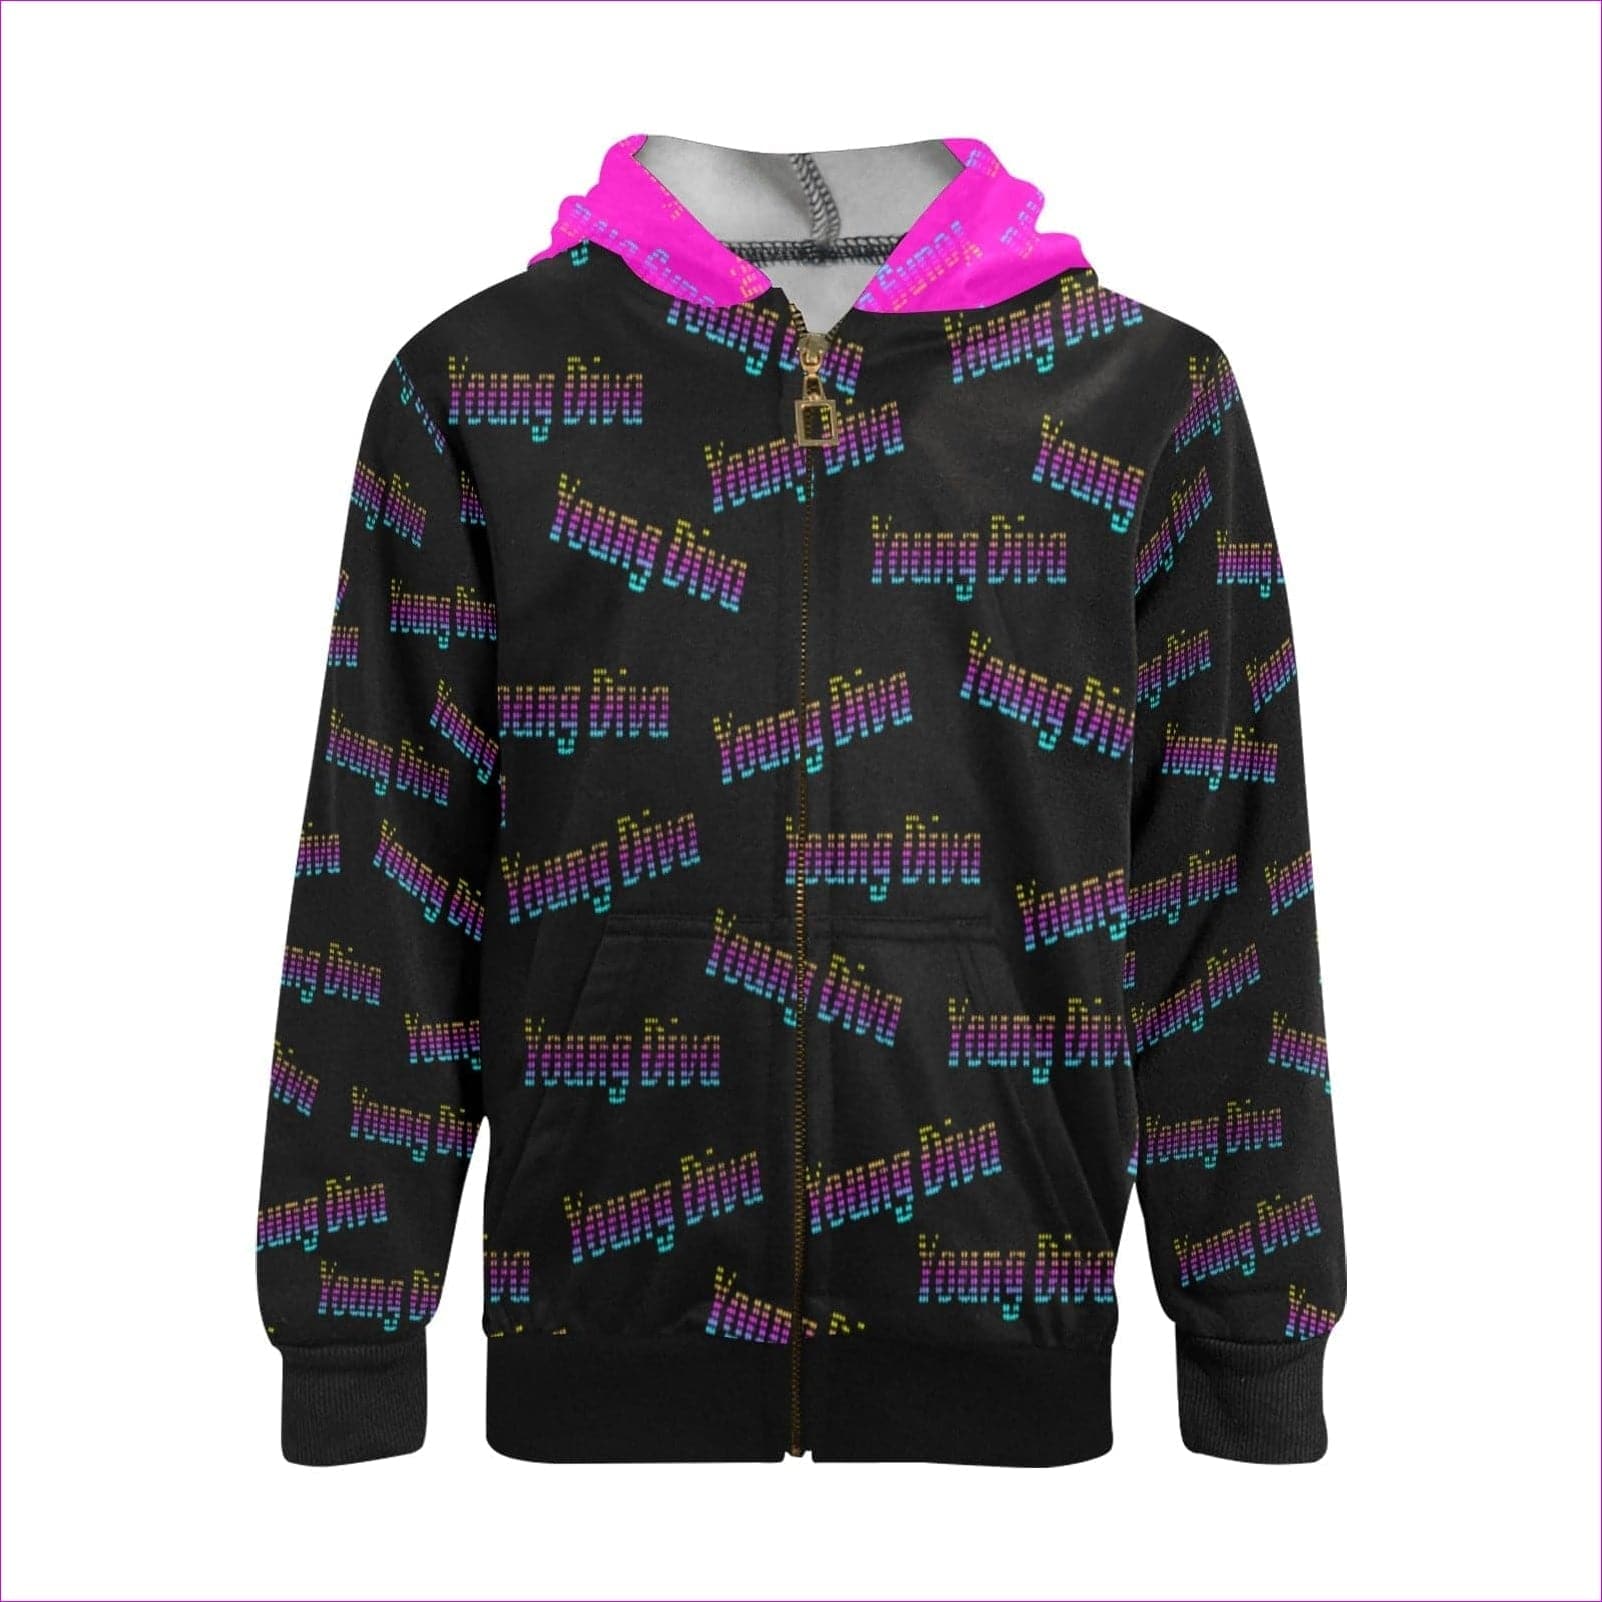 Young Diva Fuzzy Kids Hoodie - Kid's Hoodies at TFC&H Co.